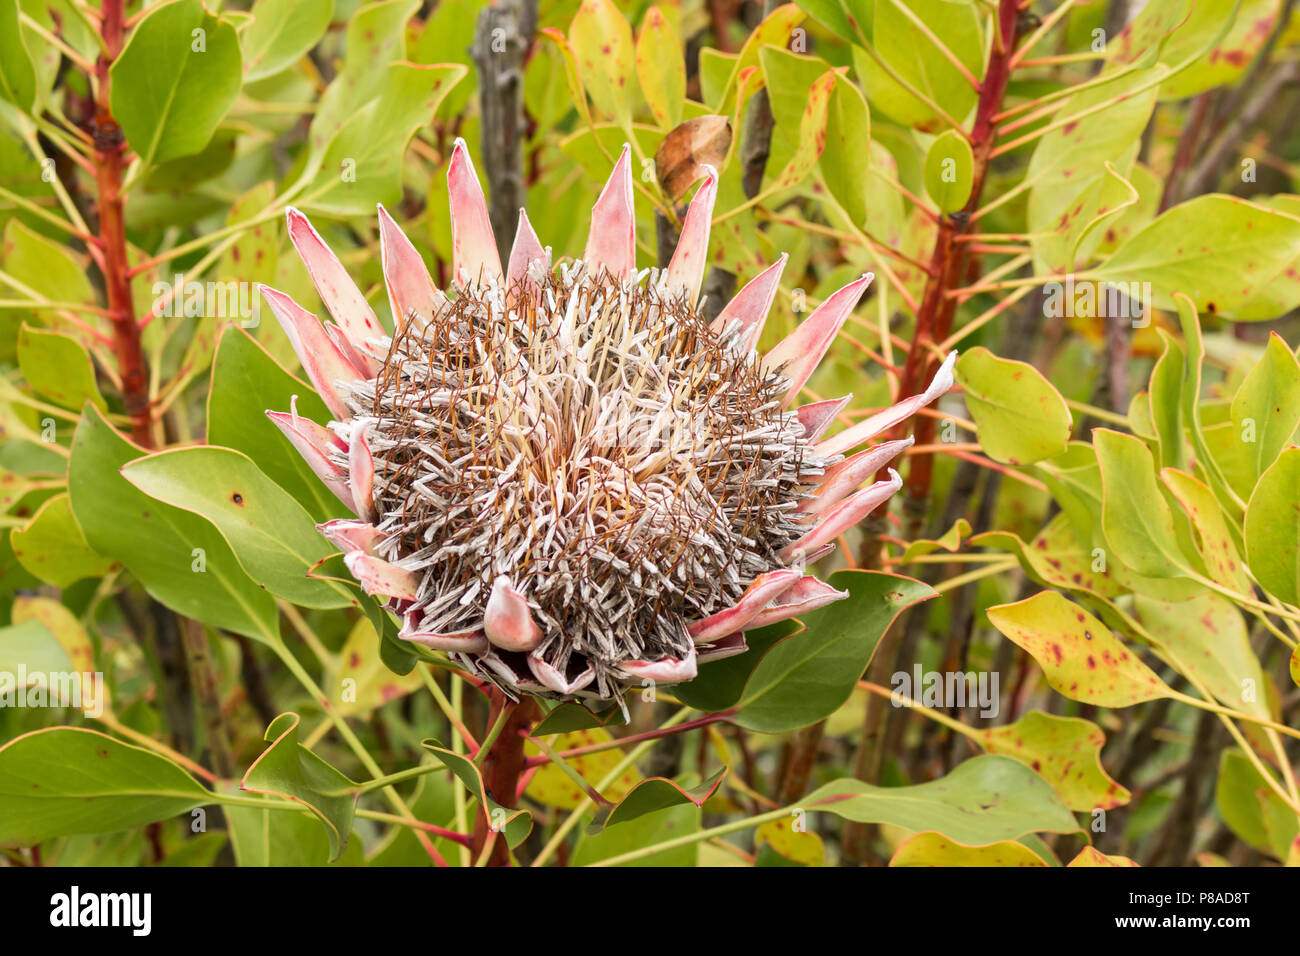 Protea flower gone to seed Stock Photo